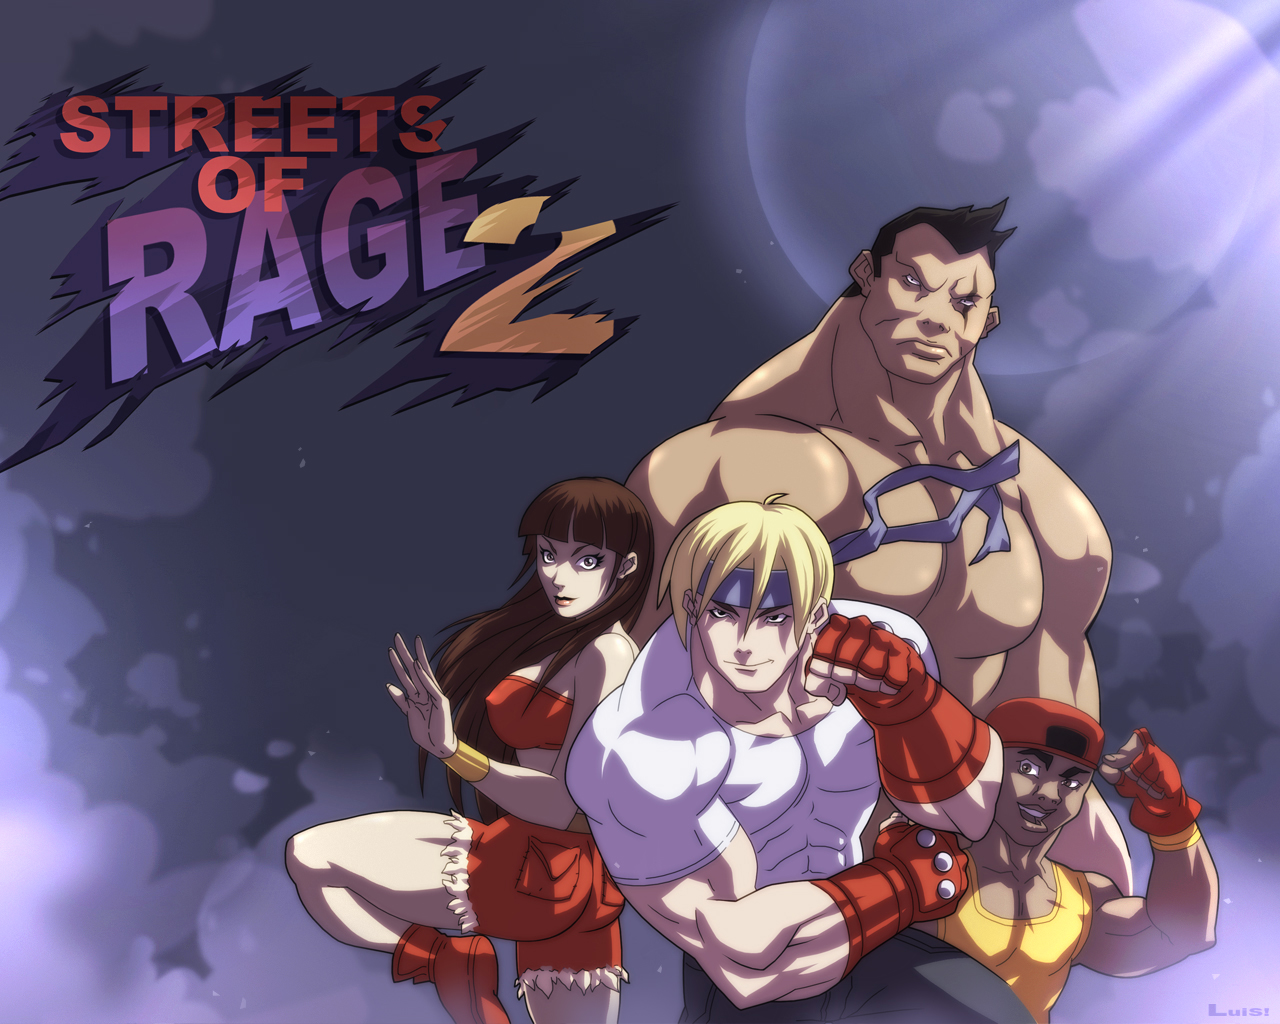 Streets_Of_Rage_2_by_XGoldenboyX.jpg